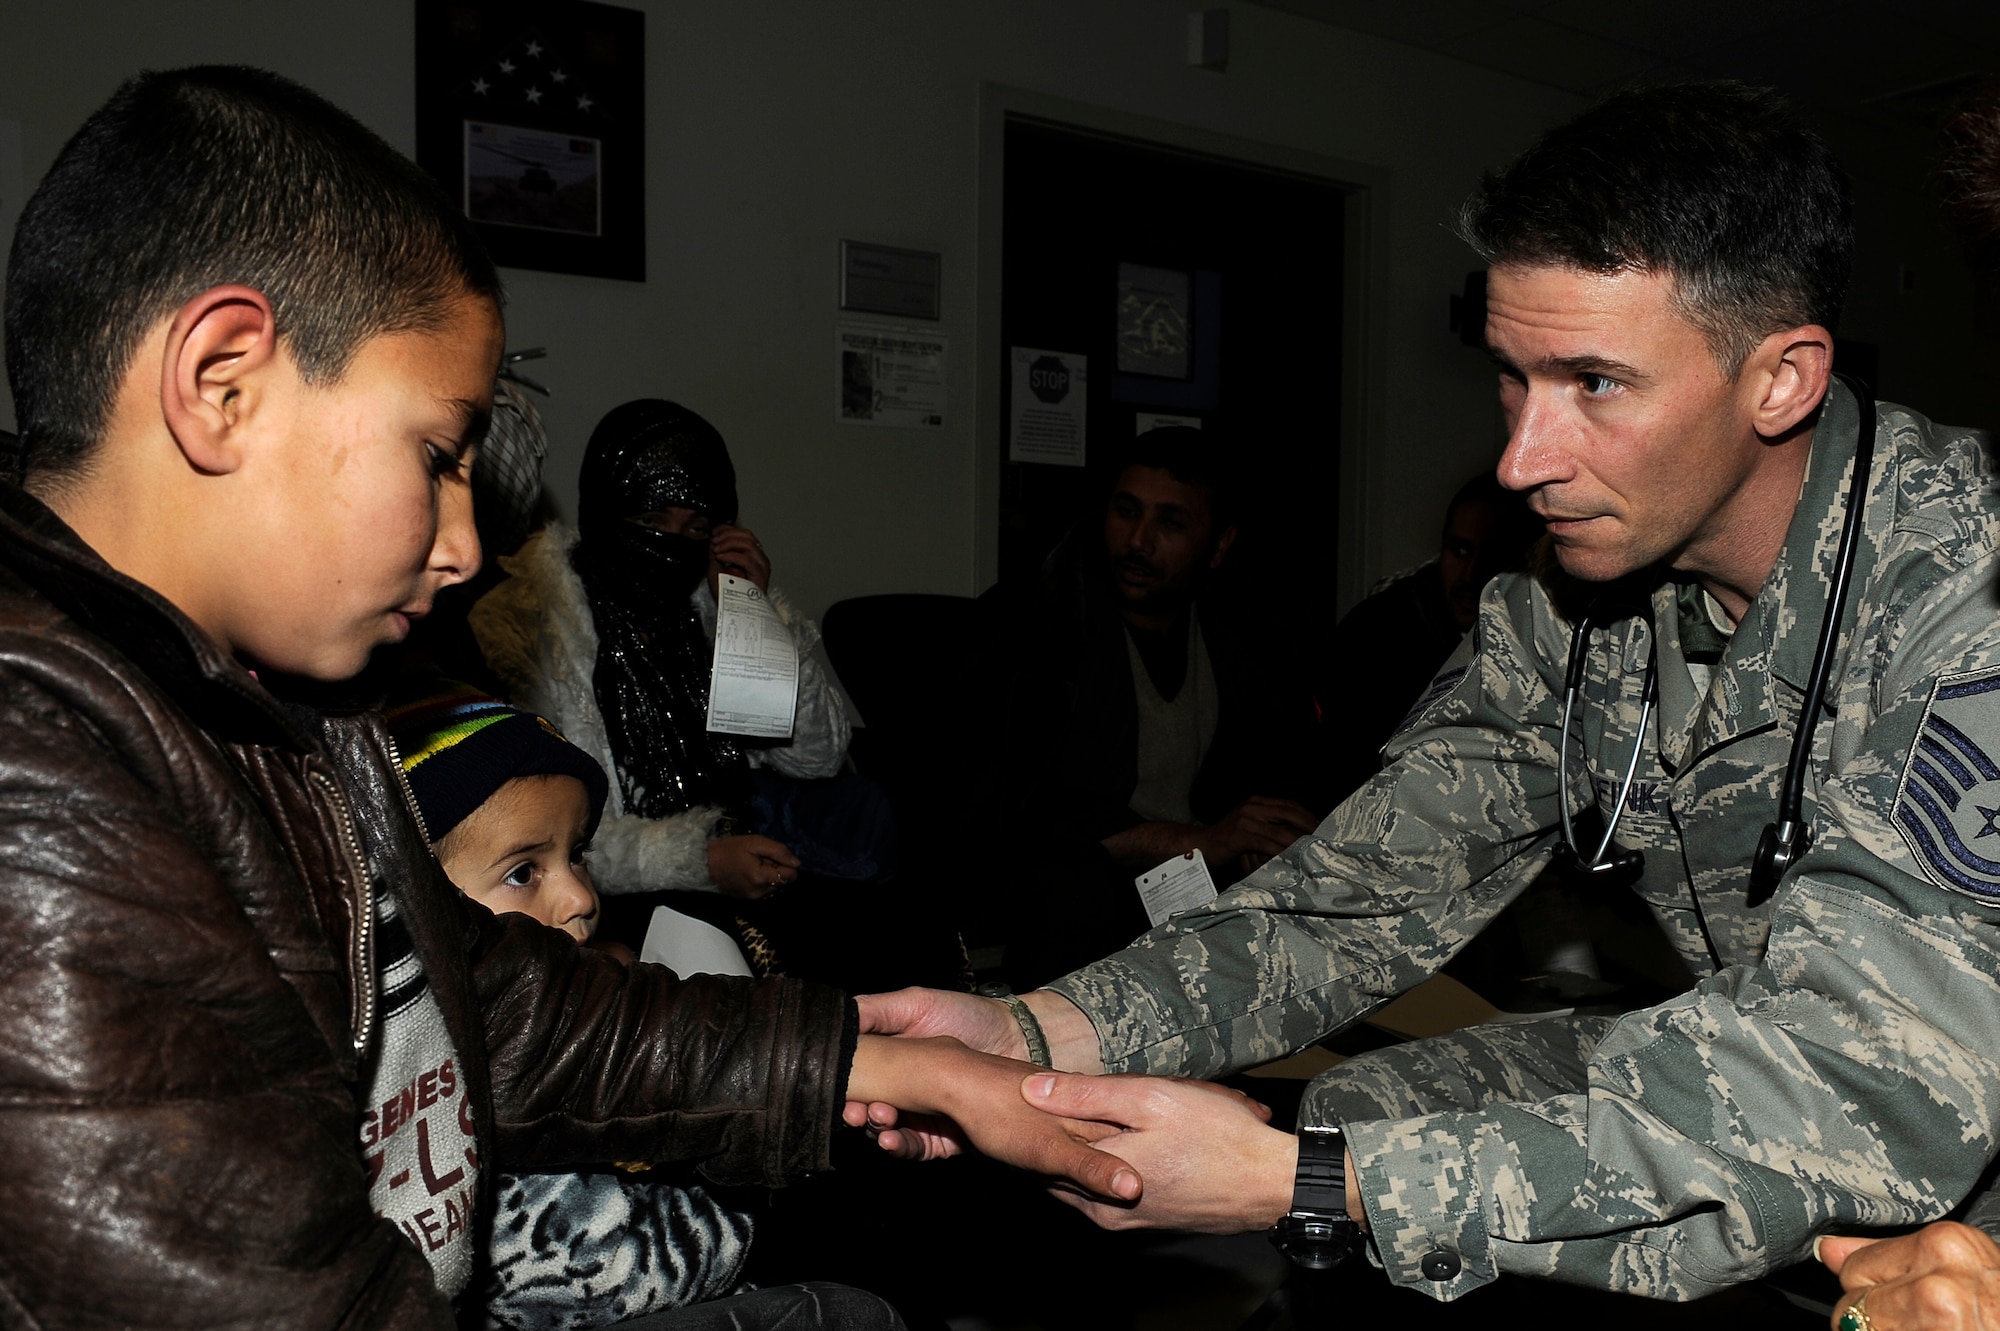 Master Sgt. Jan Fink assesses an avalanche survivor's wrist Feb. 9, 2010, at Craig Joint Theater Hospital at Bagram Airfield, Afghanistan. Dozens of Afghans were taken to Bagram Airfield after avalanches struck a mountain pass in the Parwan Province. Sergeant Fink is assigned to the 455th Expeditionary Medical Group. (U.S. Air Force photo by/Tech. Sgt. Jeromy K. Cross)